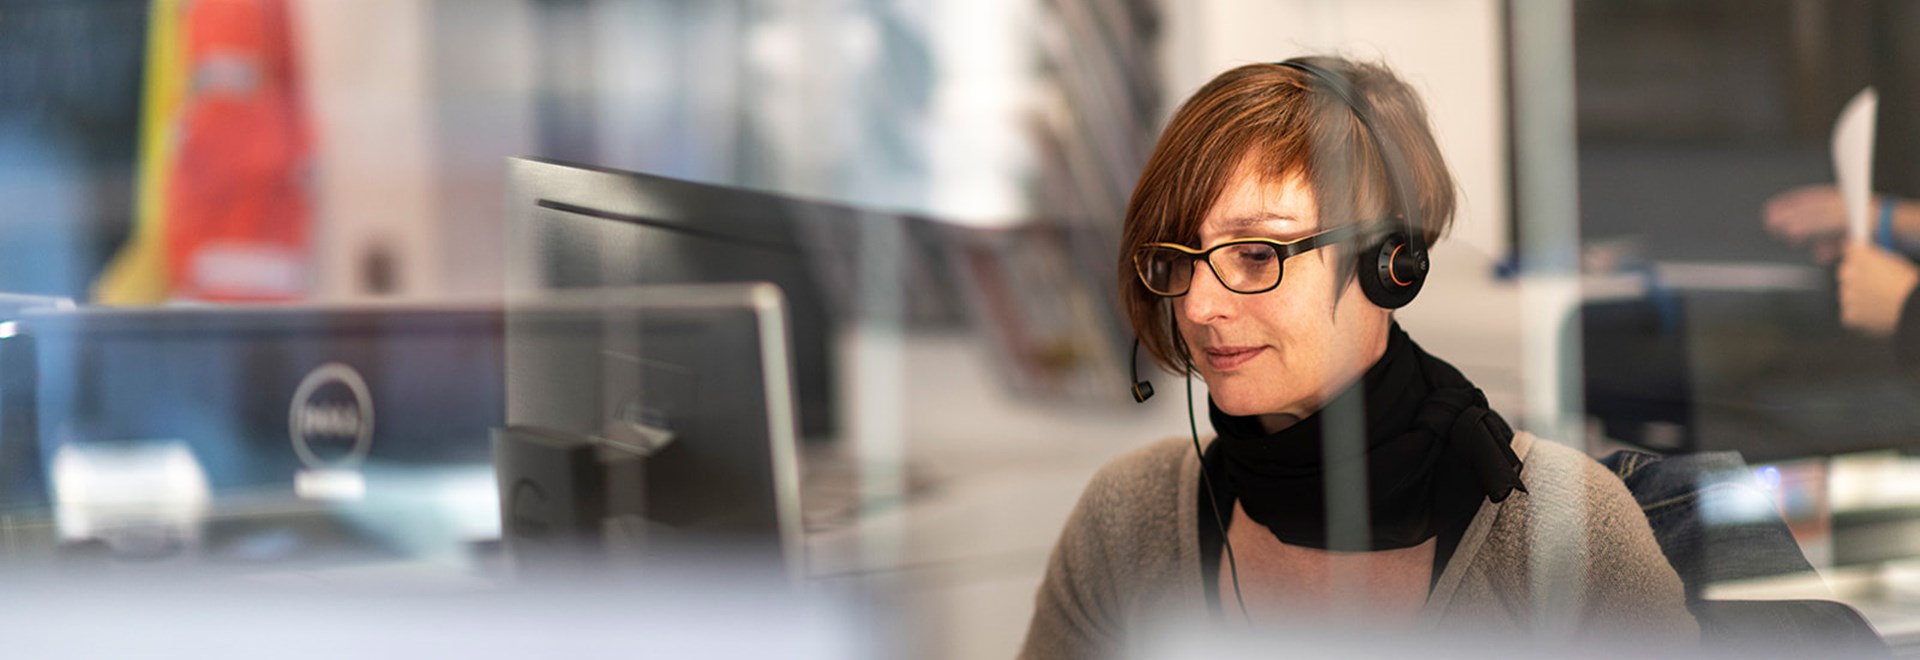 Service manager Katrin: "I know how my day starts, but never know how it will continue"